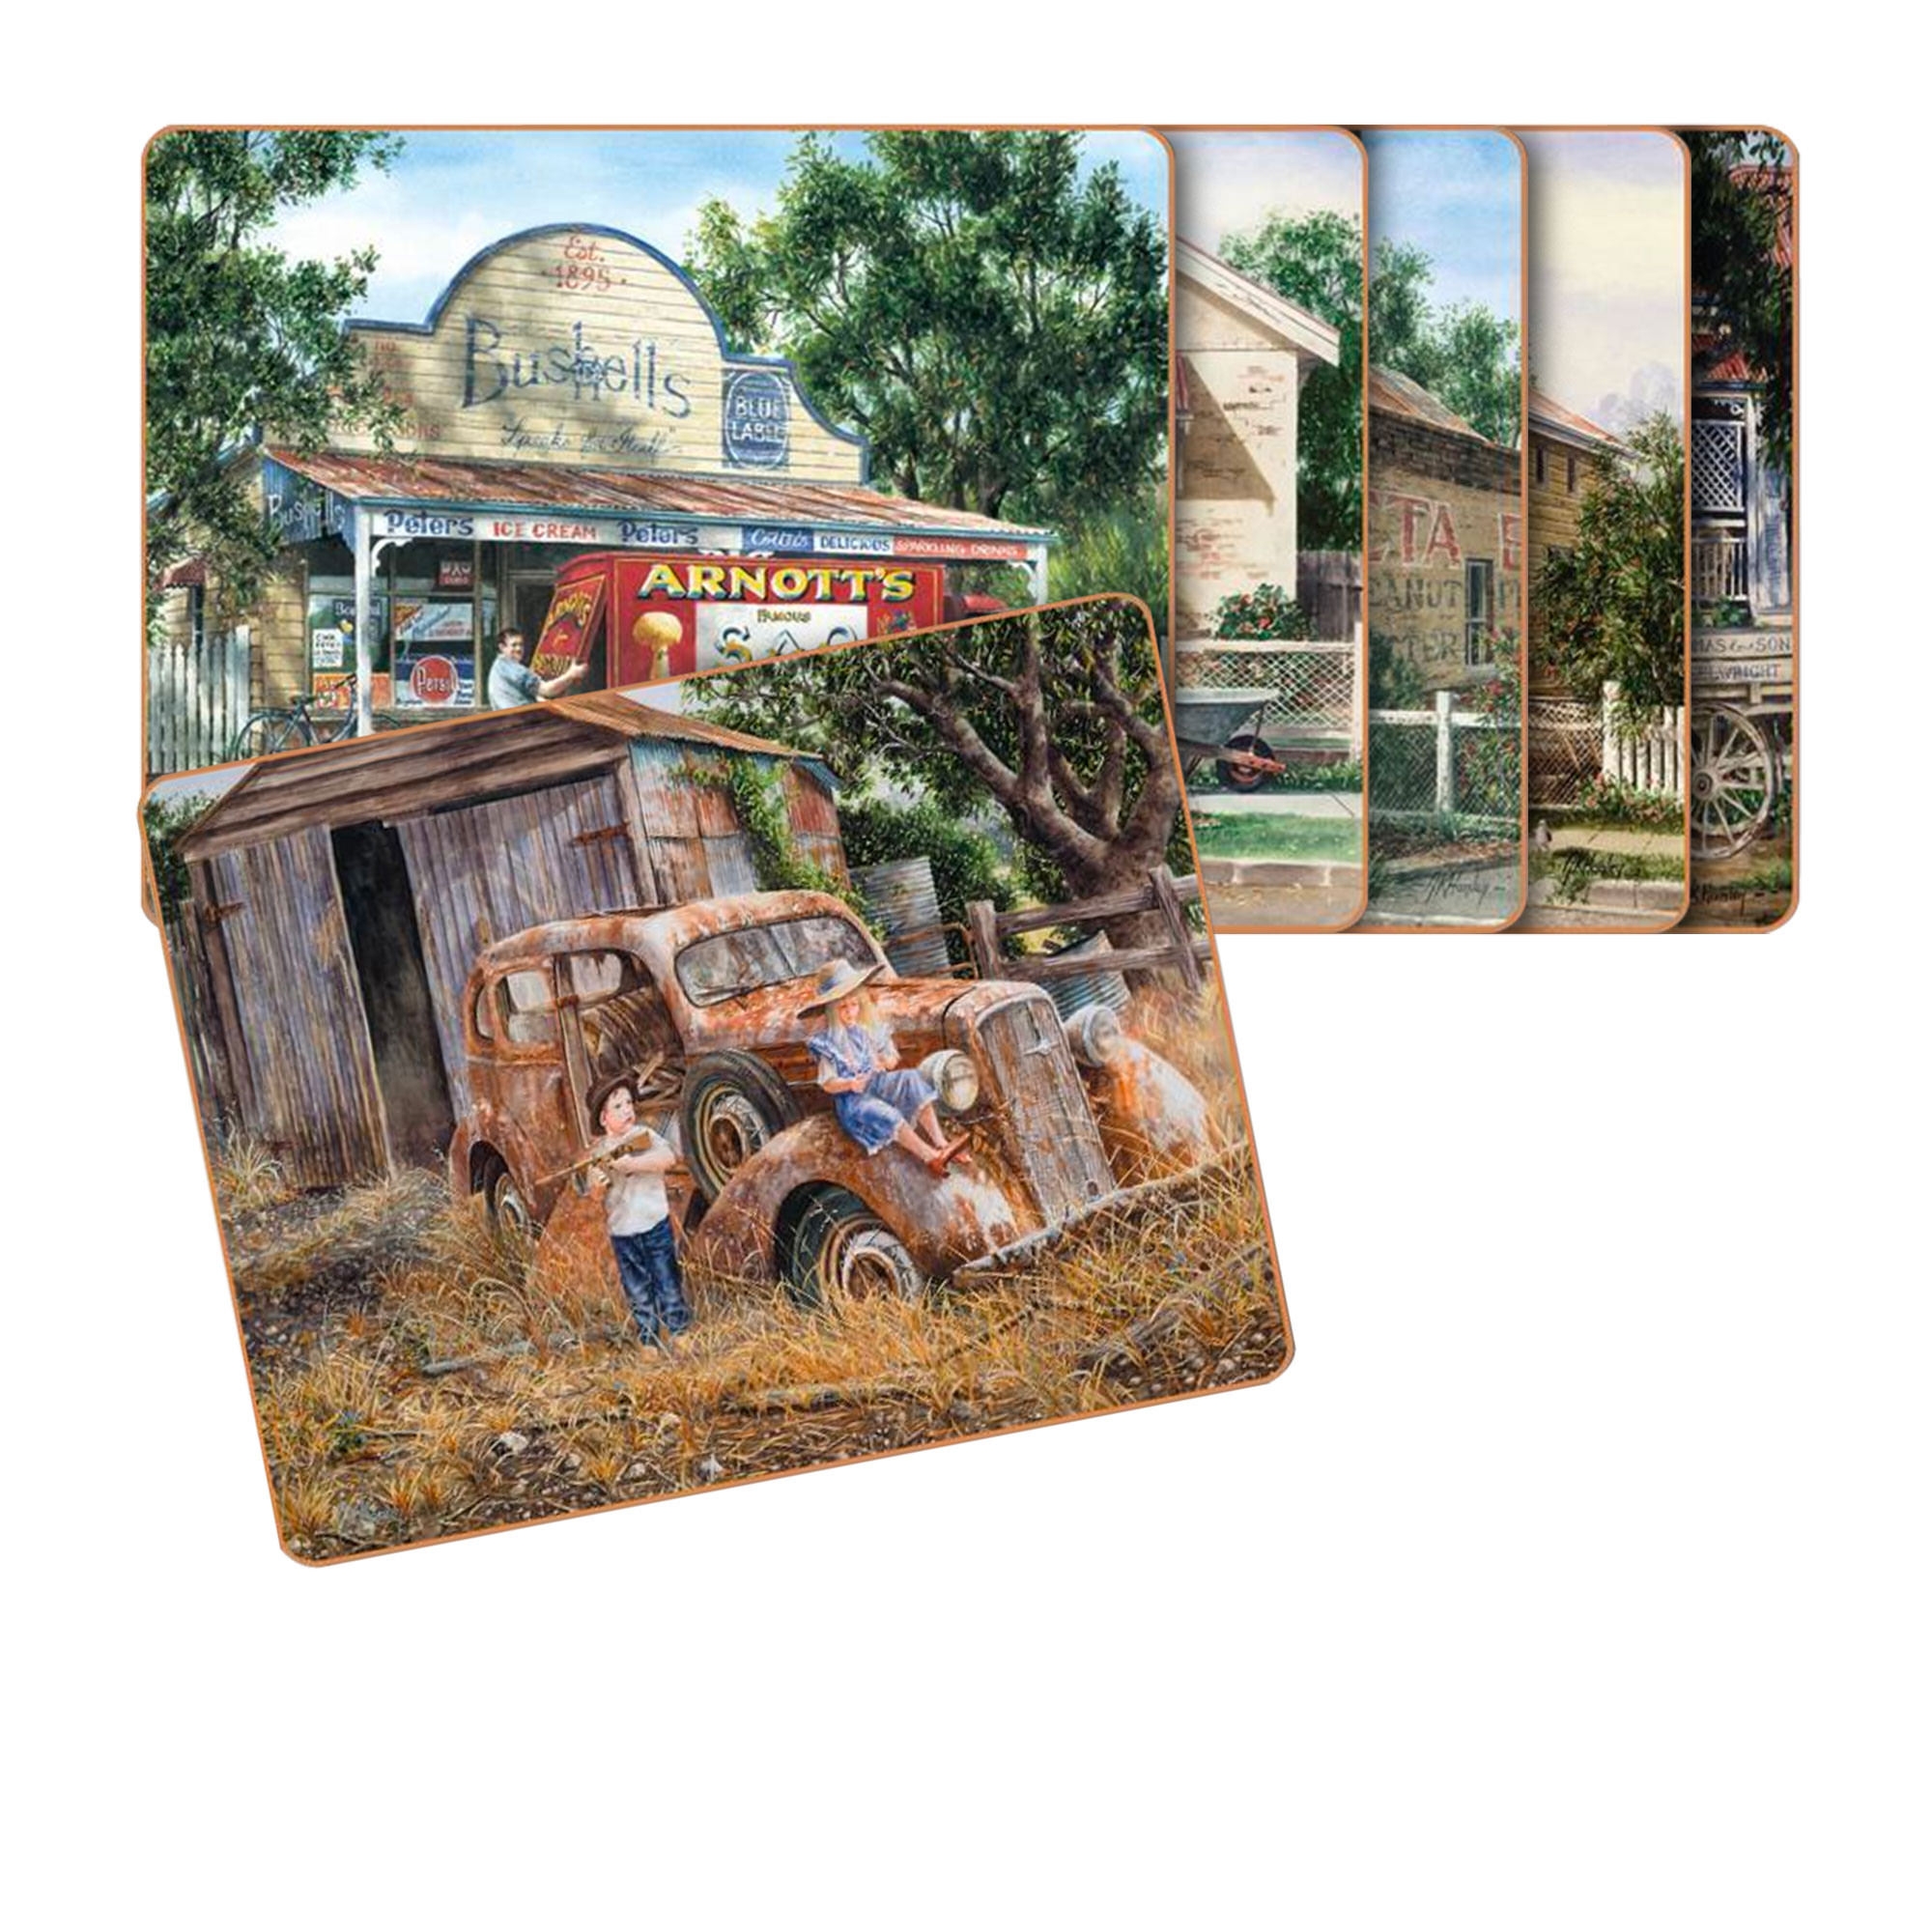 Cinnamon Rectangular Placemat Set of 6 Times Now Past Image 1